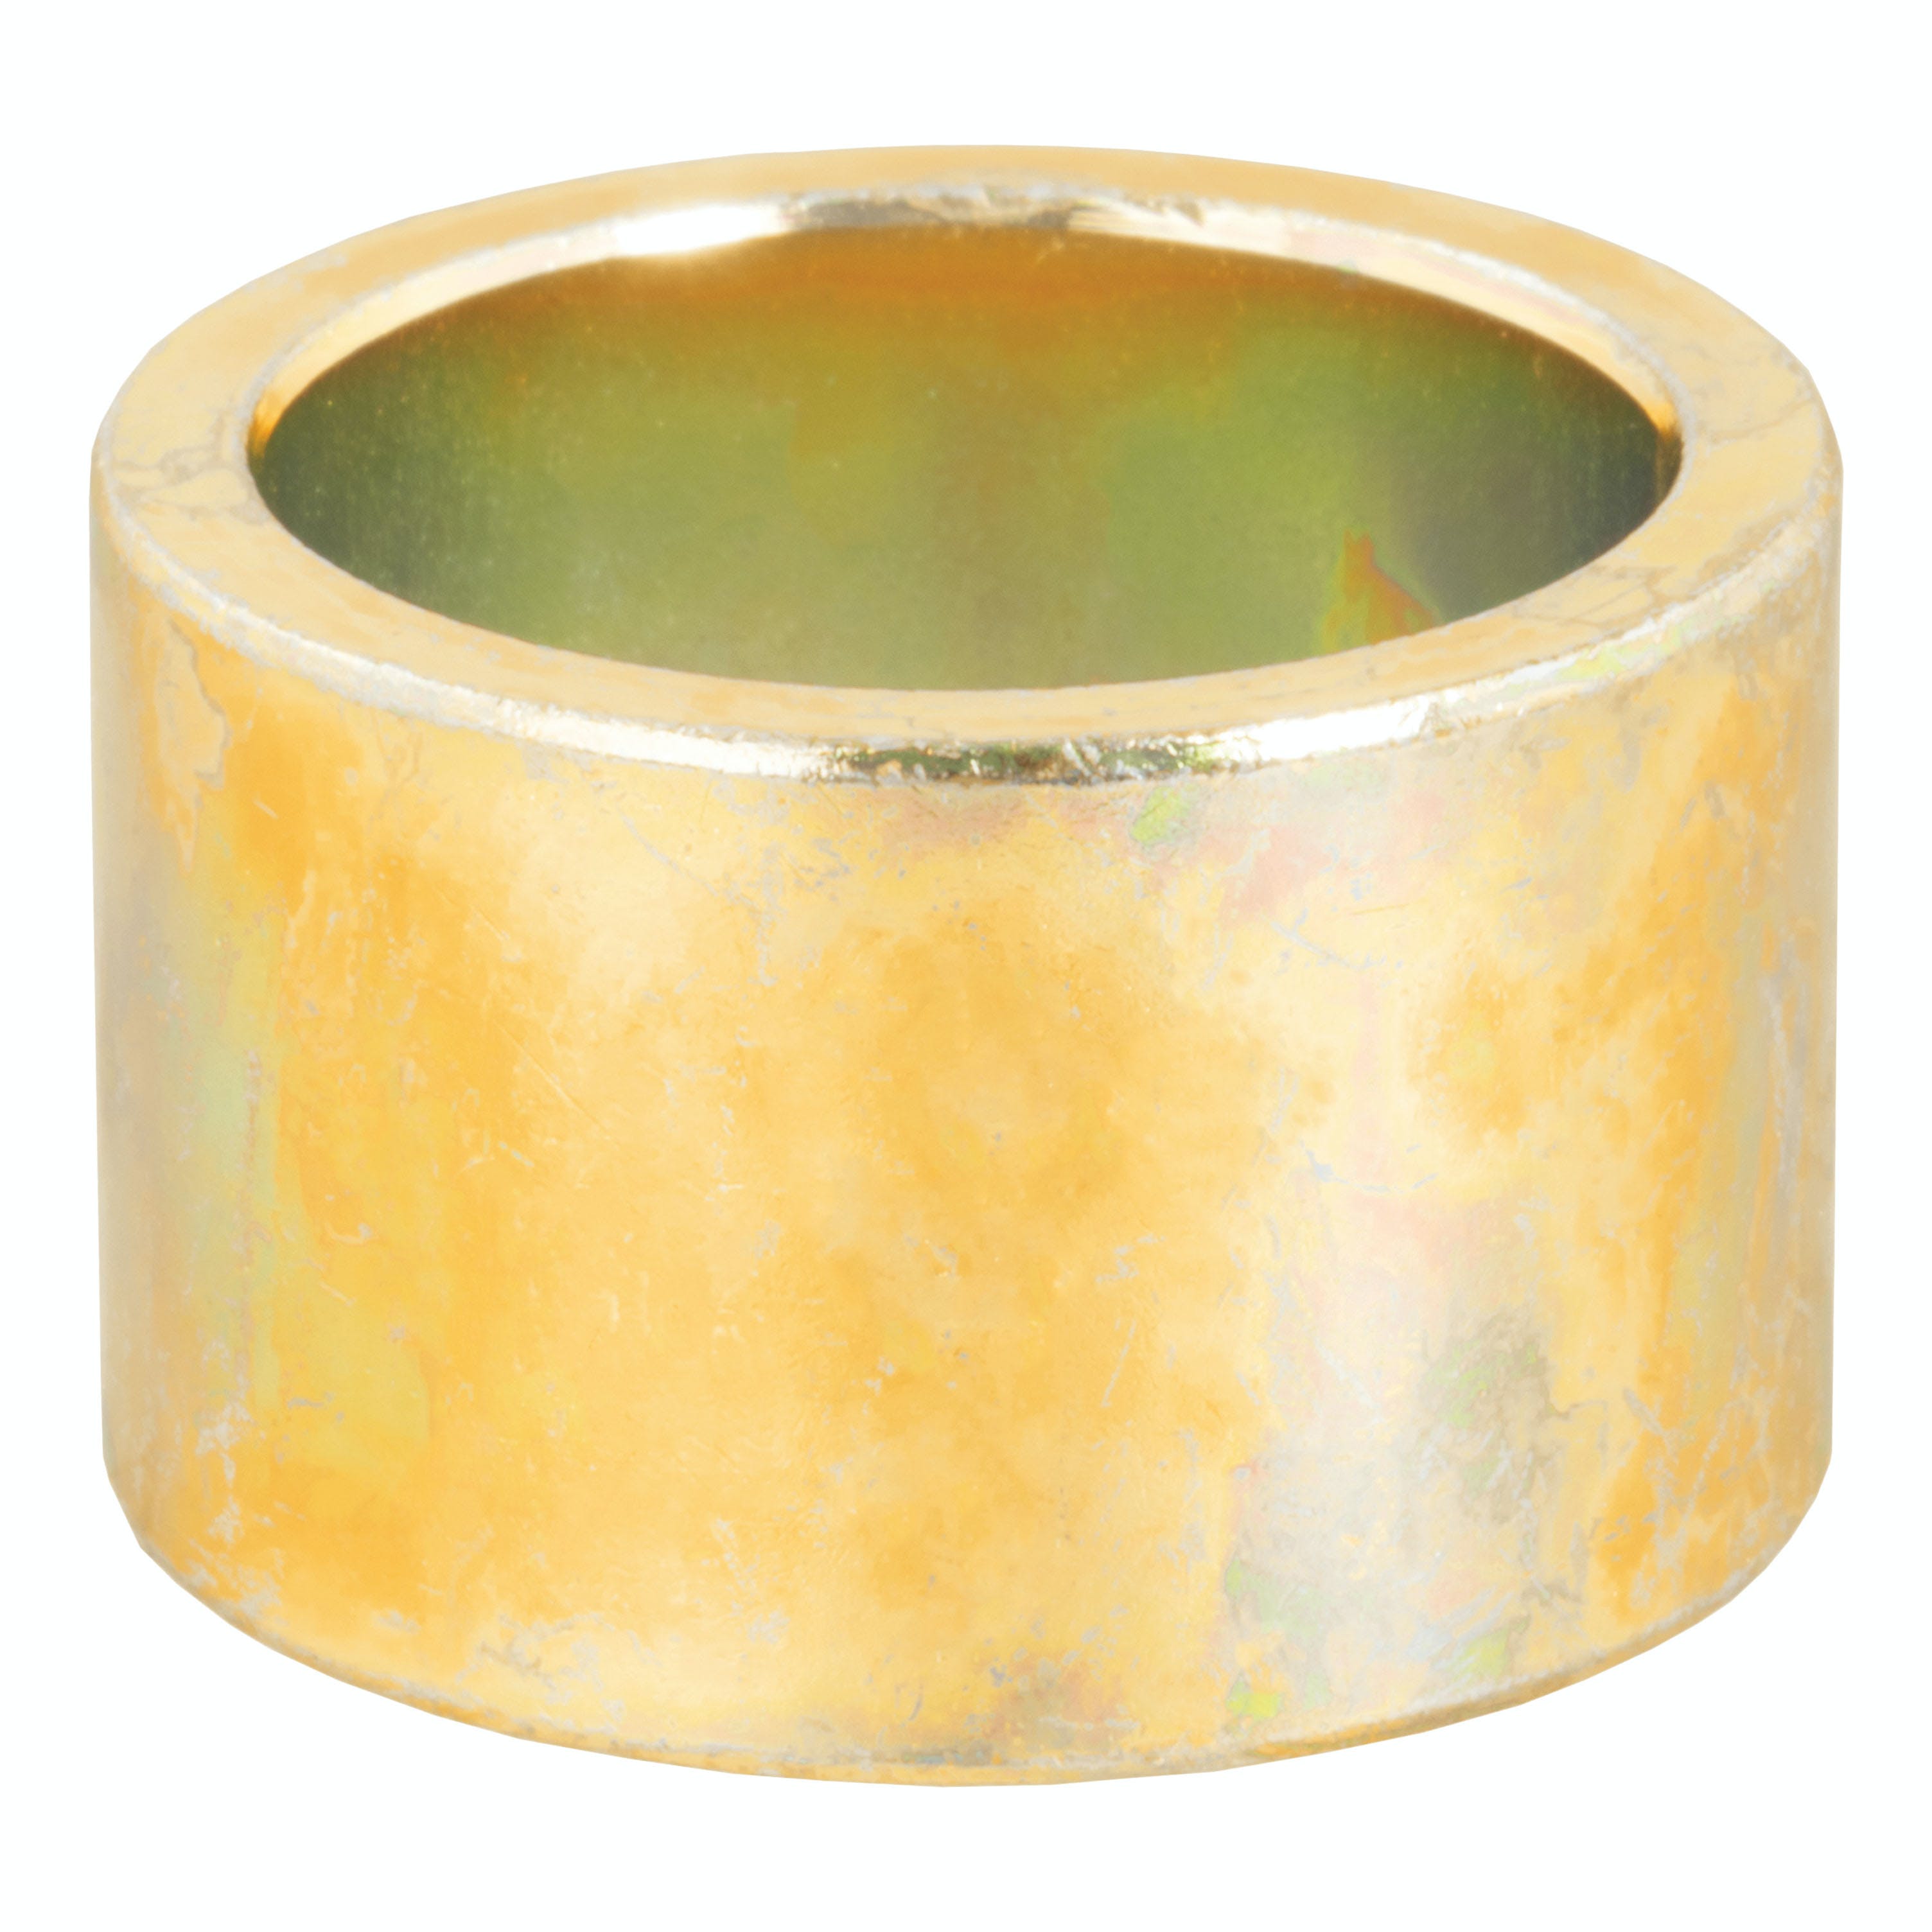 CURT 21200 Trailer Ball Reducer Bushing (From 1-1/4 to 1 Stem)